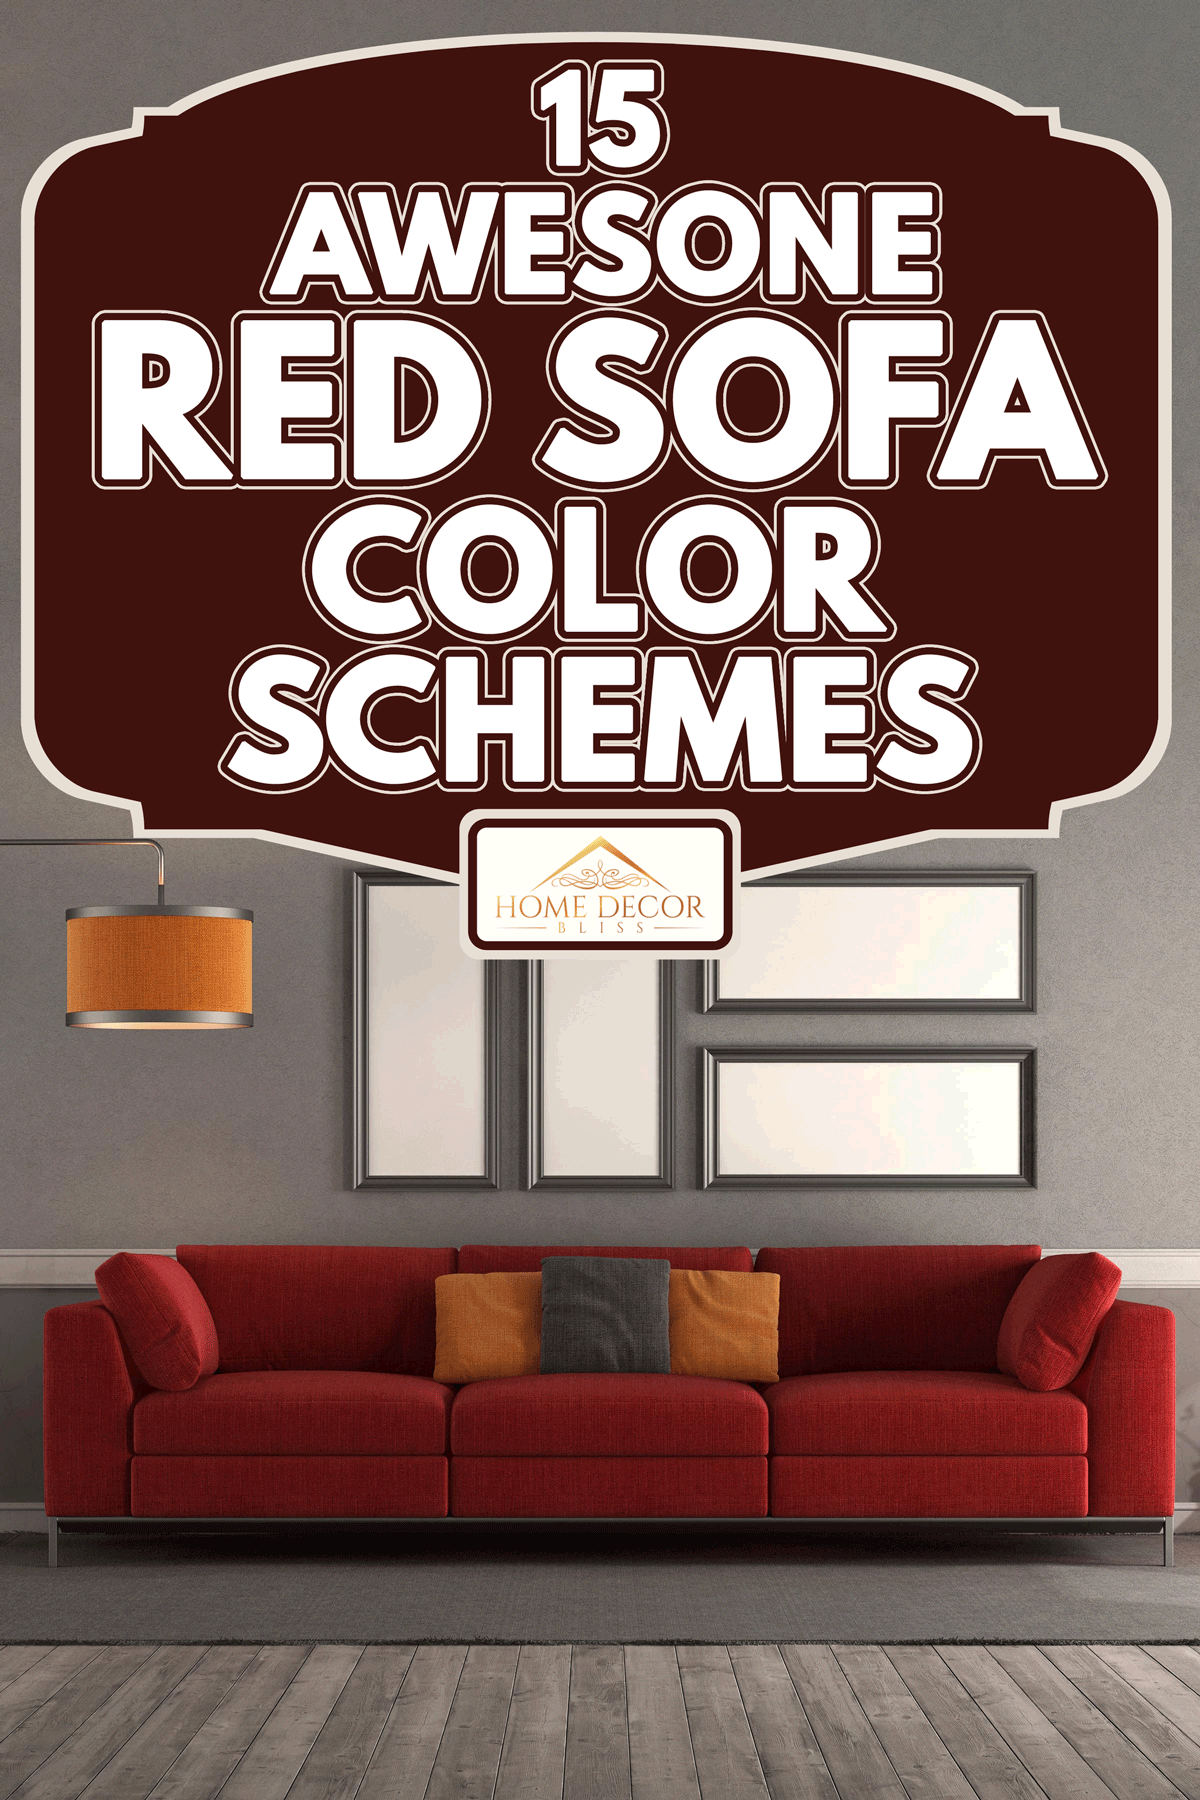 Living room with modern red sofa, 15 Awesome Red Sofa Color Schemes